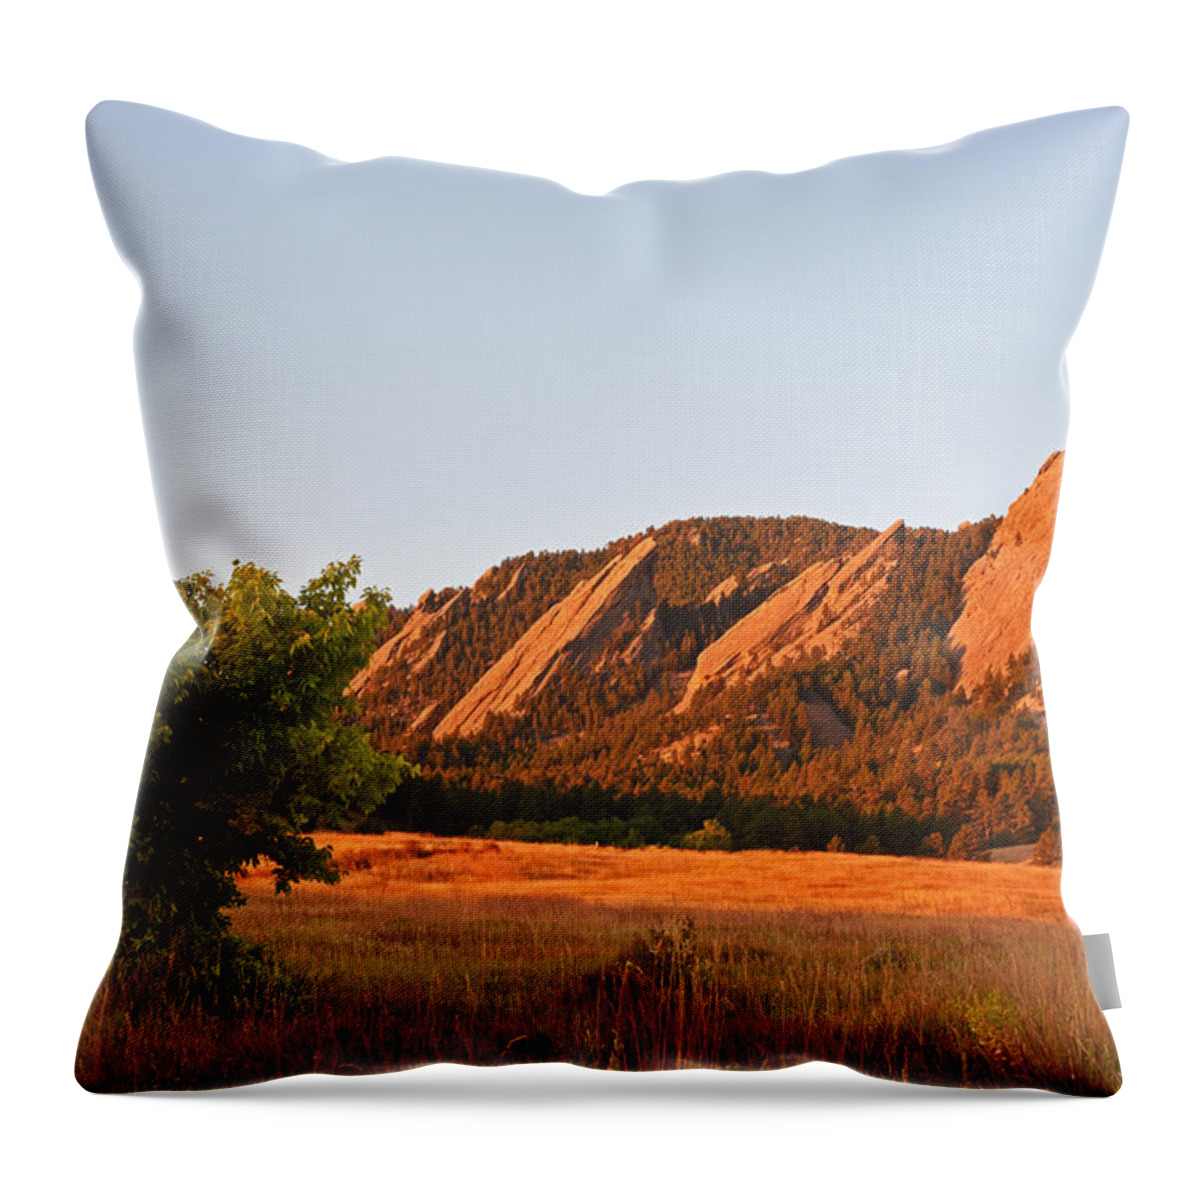 Boulder Throw Pillow featuring the photograph The Flatirons Boulder Colorado from Chautauqua Park Tree by Toby McGuire